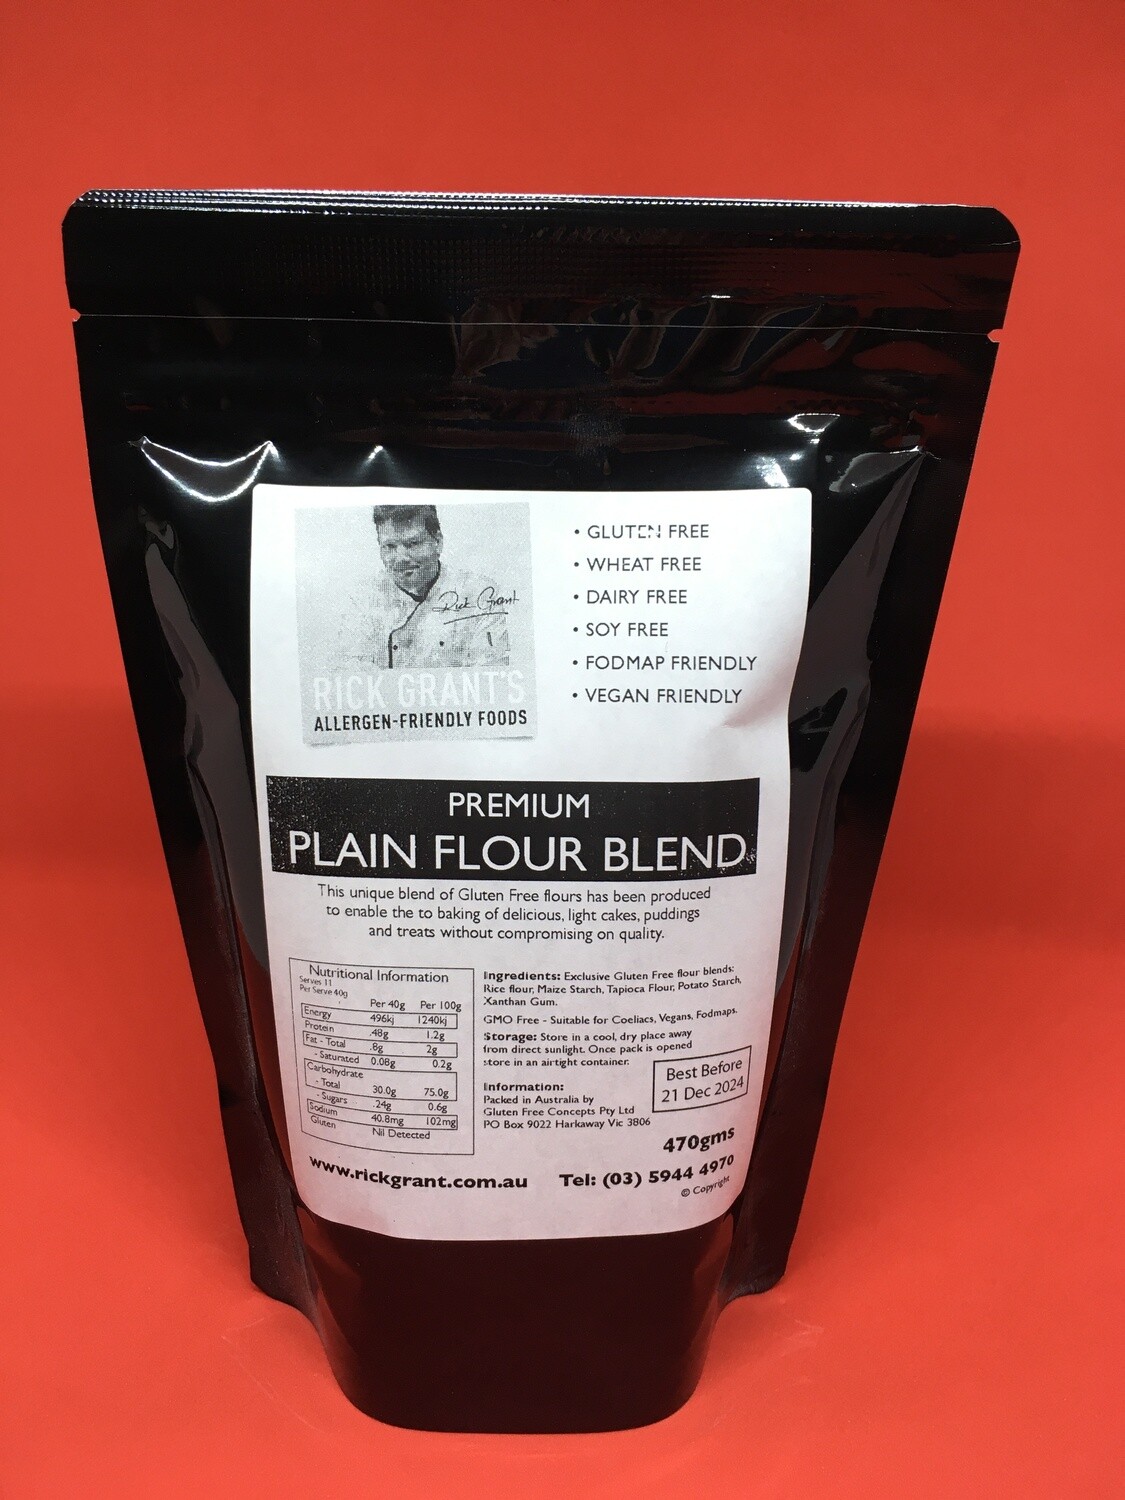 NEW TO THE STORE!
Premium Gluten Free Plain Flour can be used for all cooking when plain flour is called for.